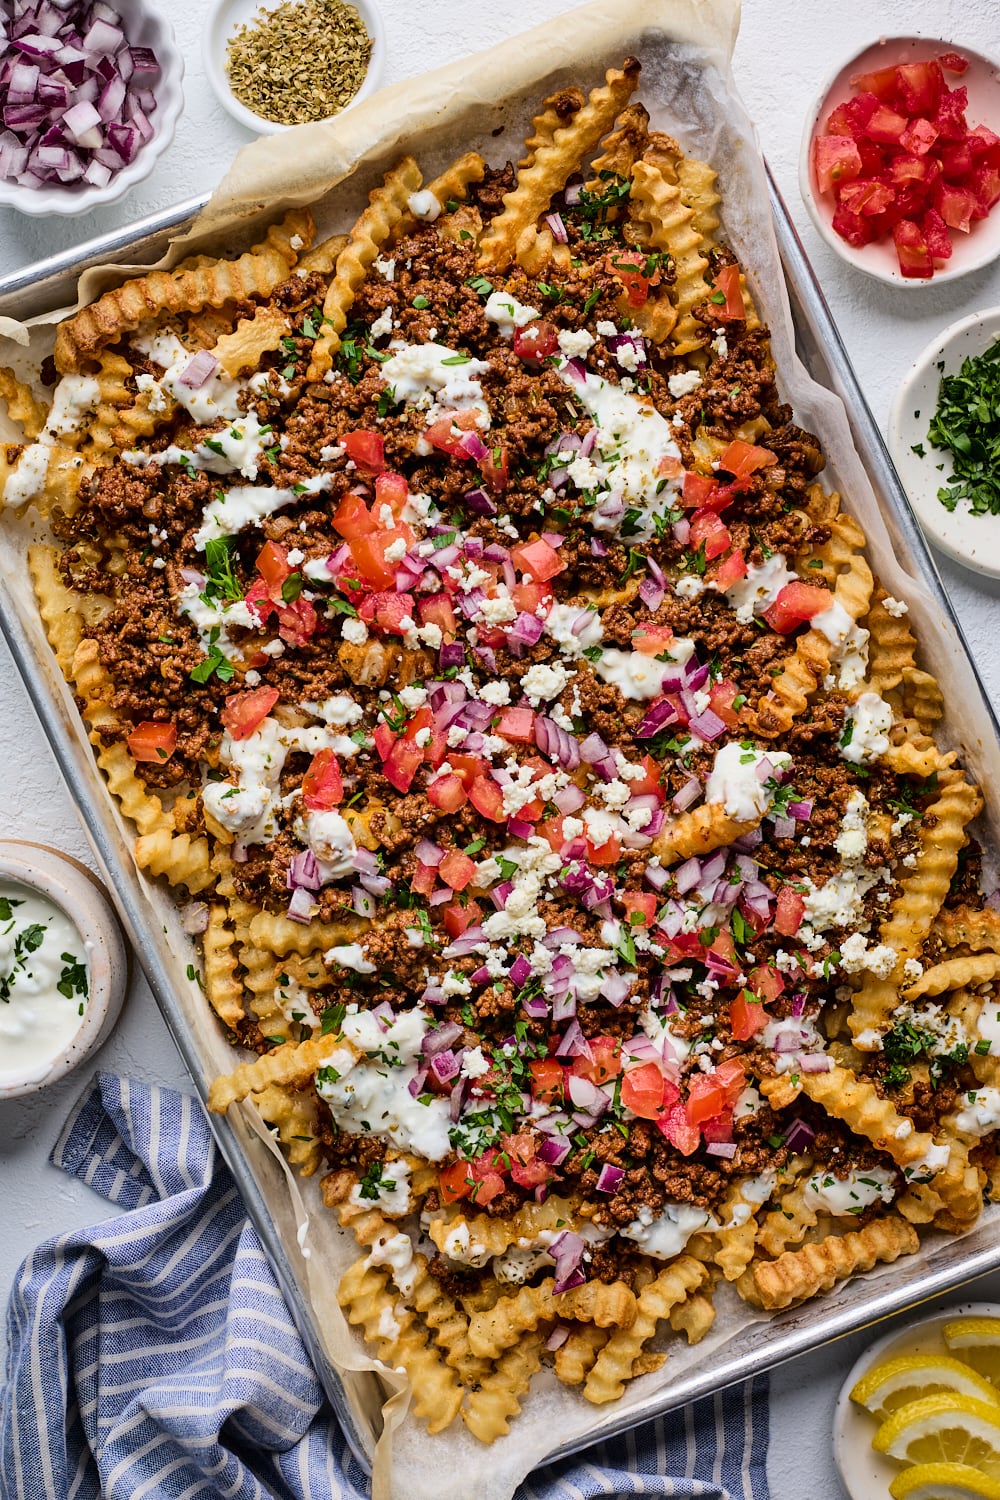 Loaded French fries (Greek style)